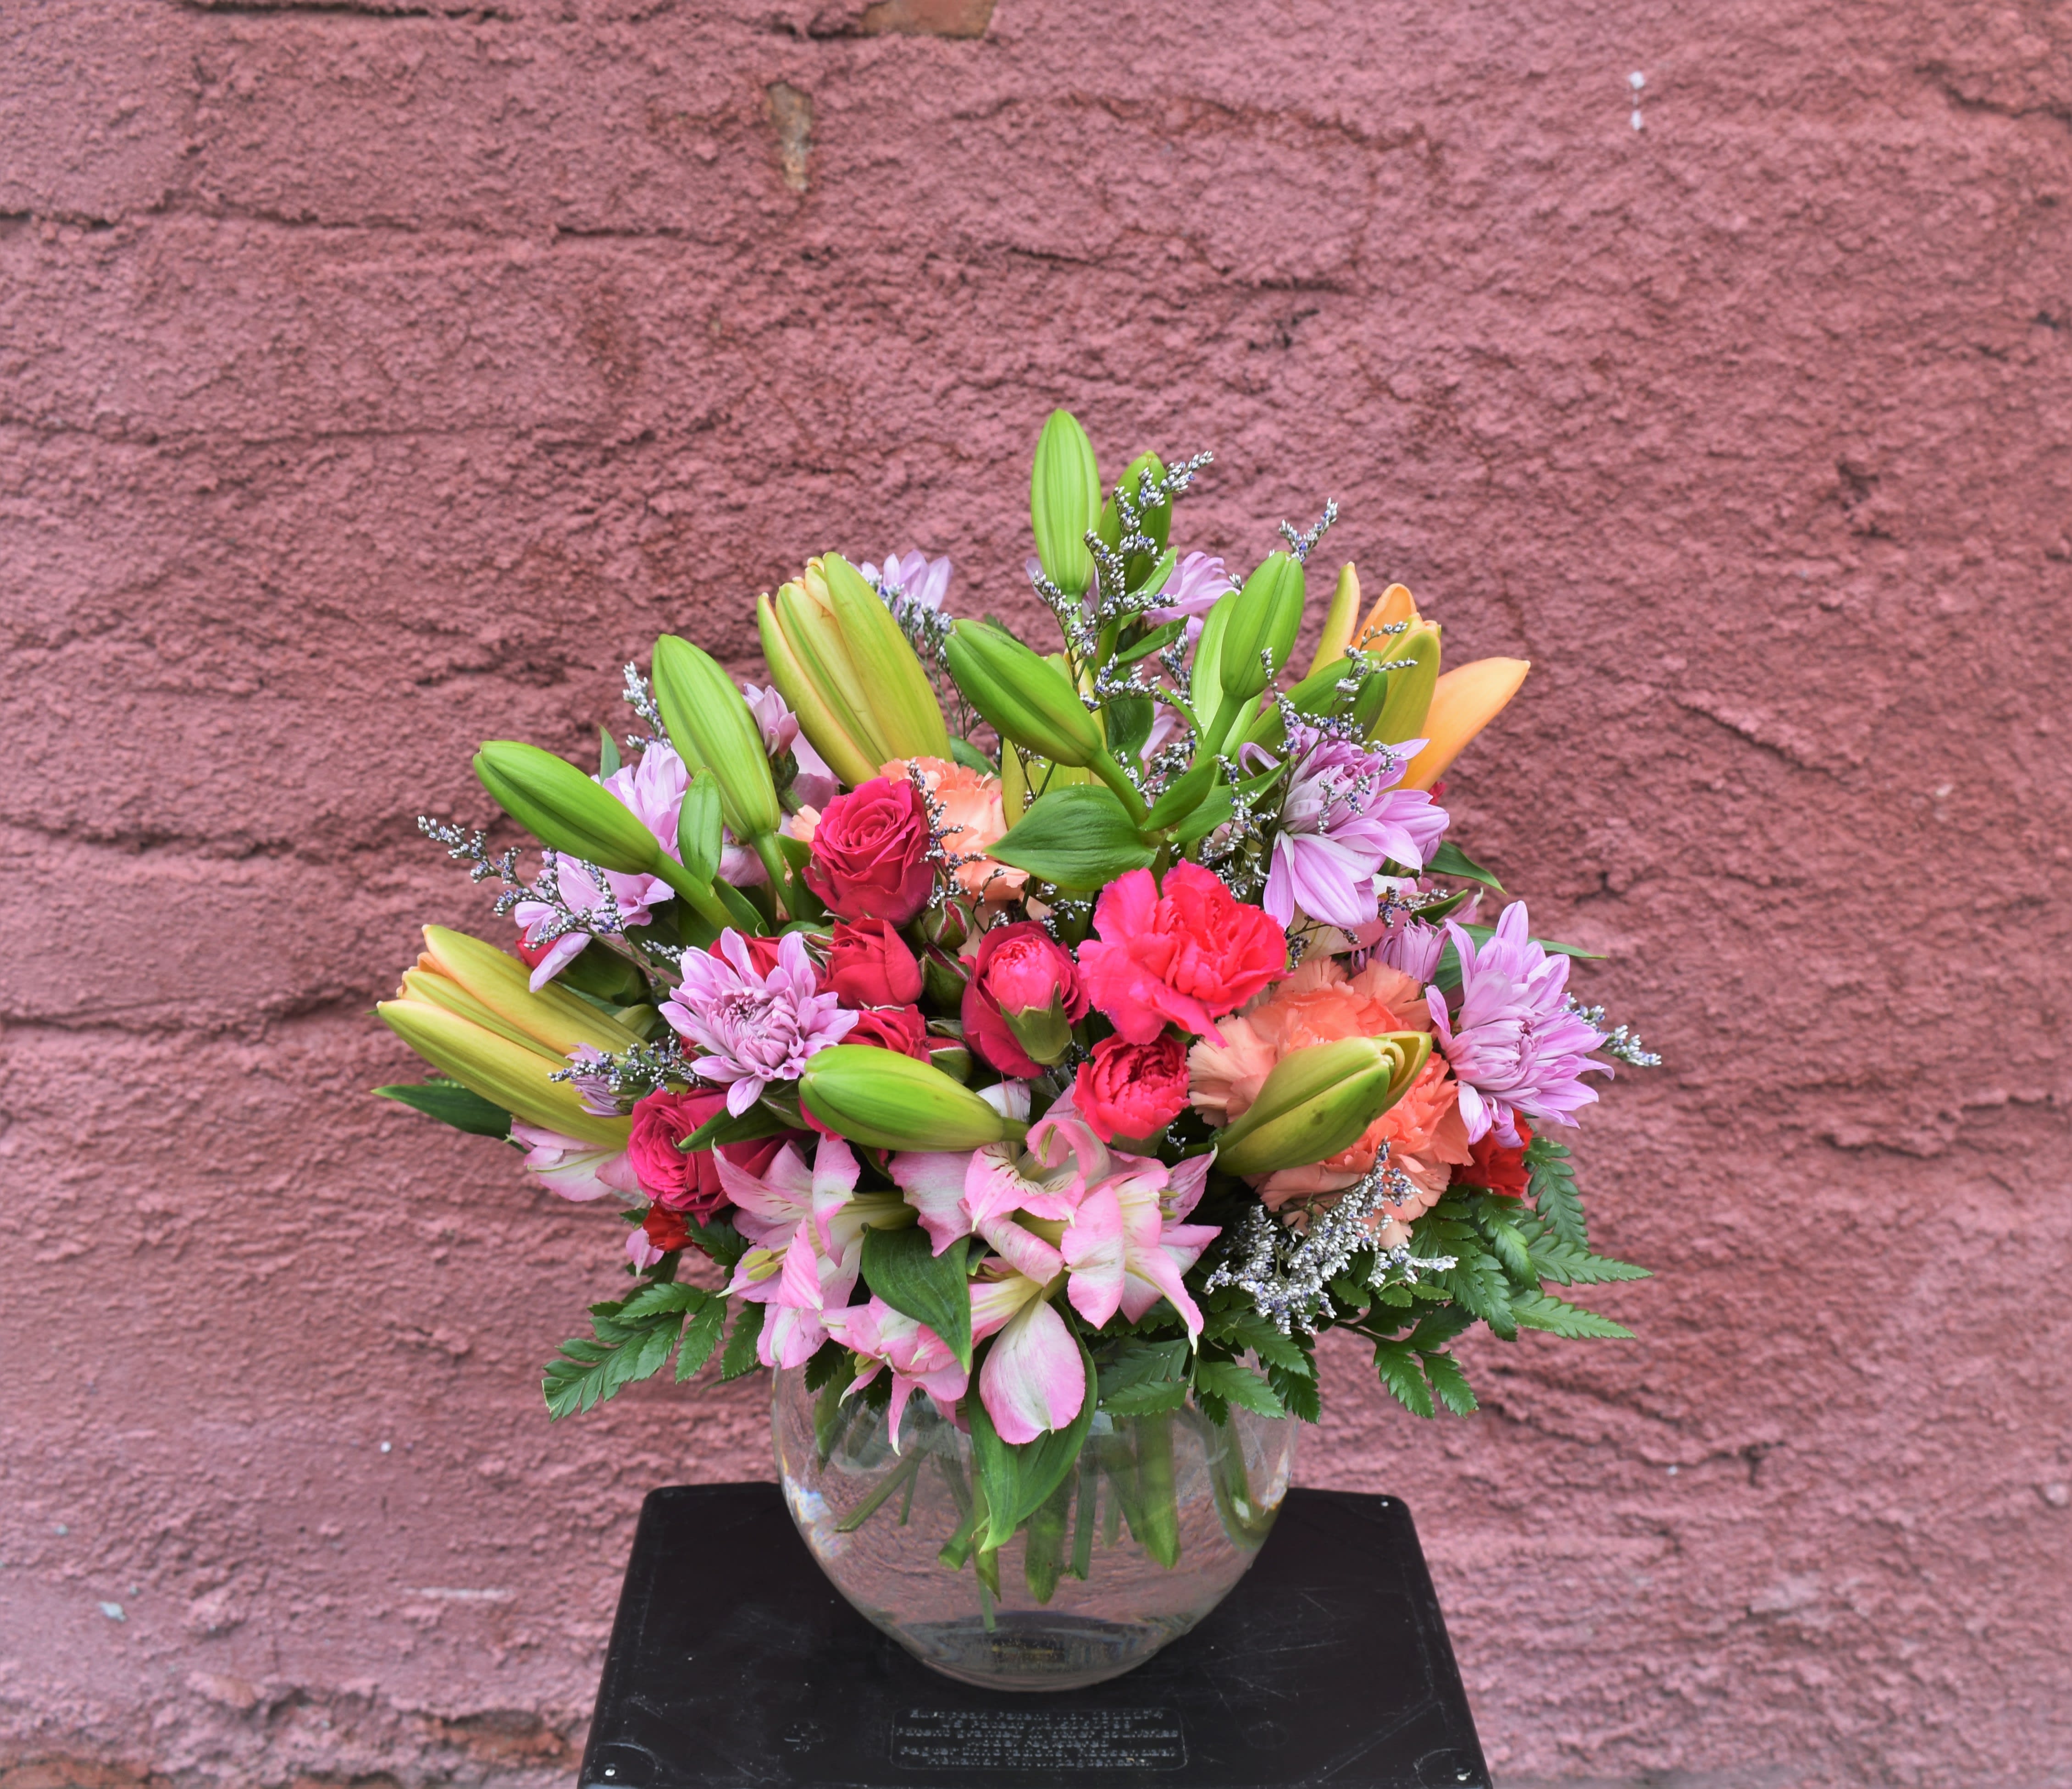 Light Up My Life Bouquet - This Bouquet offers your special recipient fresh vibrant color to brighten their day! Orange Asiatic lilies, fuchsia carnations, pink Peruvian lilies, lavender chrysanthemums and lush greens are perfectly arranged in a clear glass bubble bowl vase to send your sweetest sentiments across the miles. 